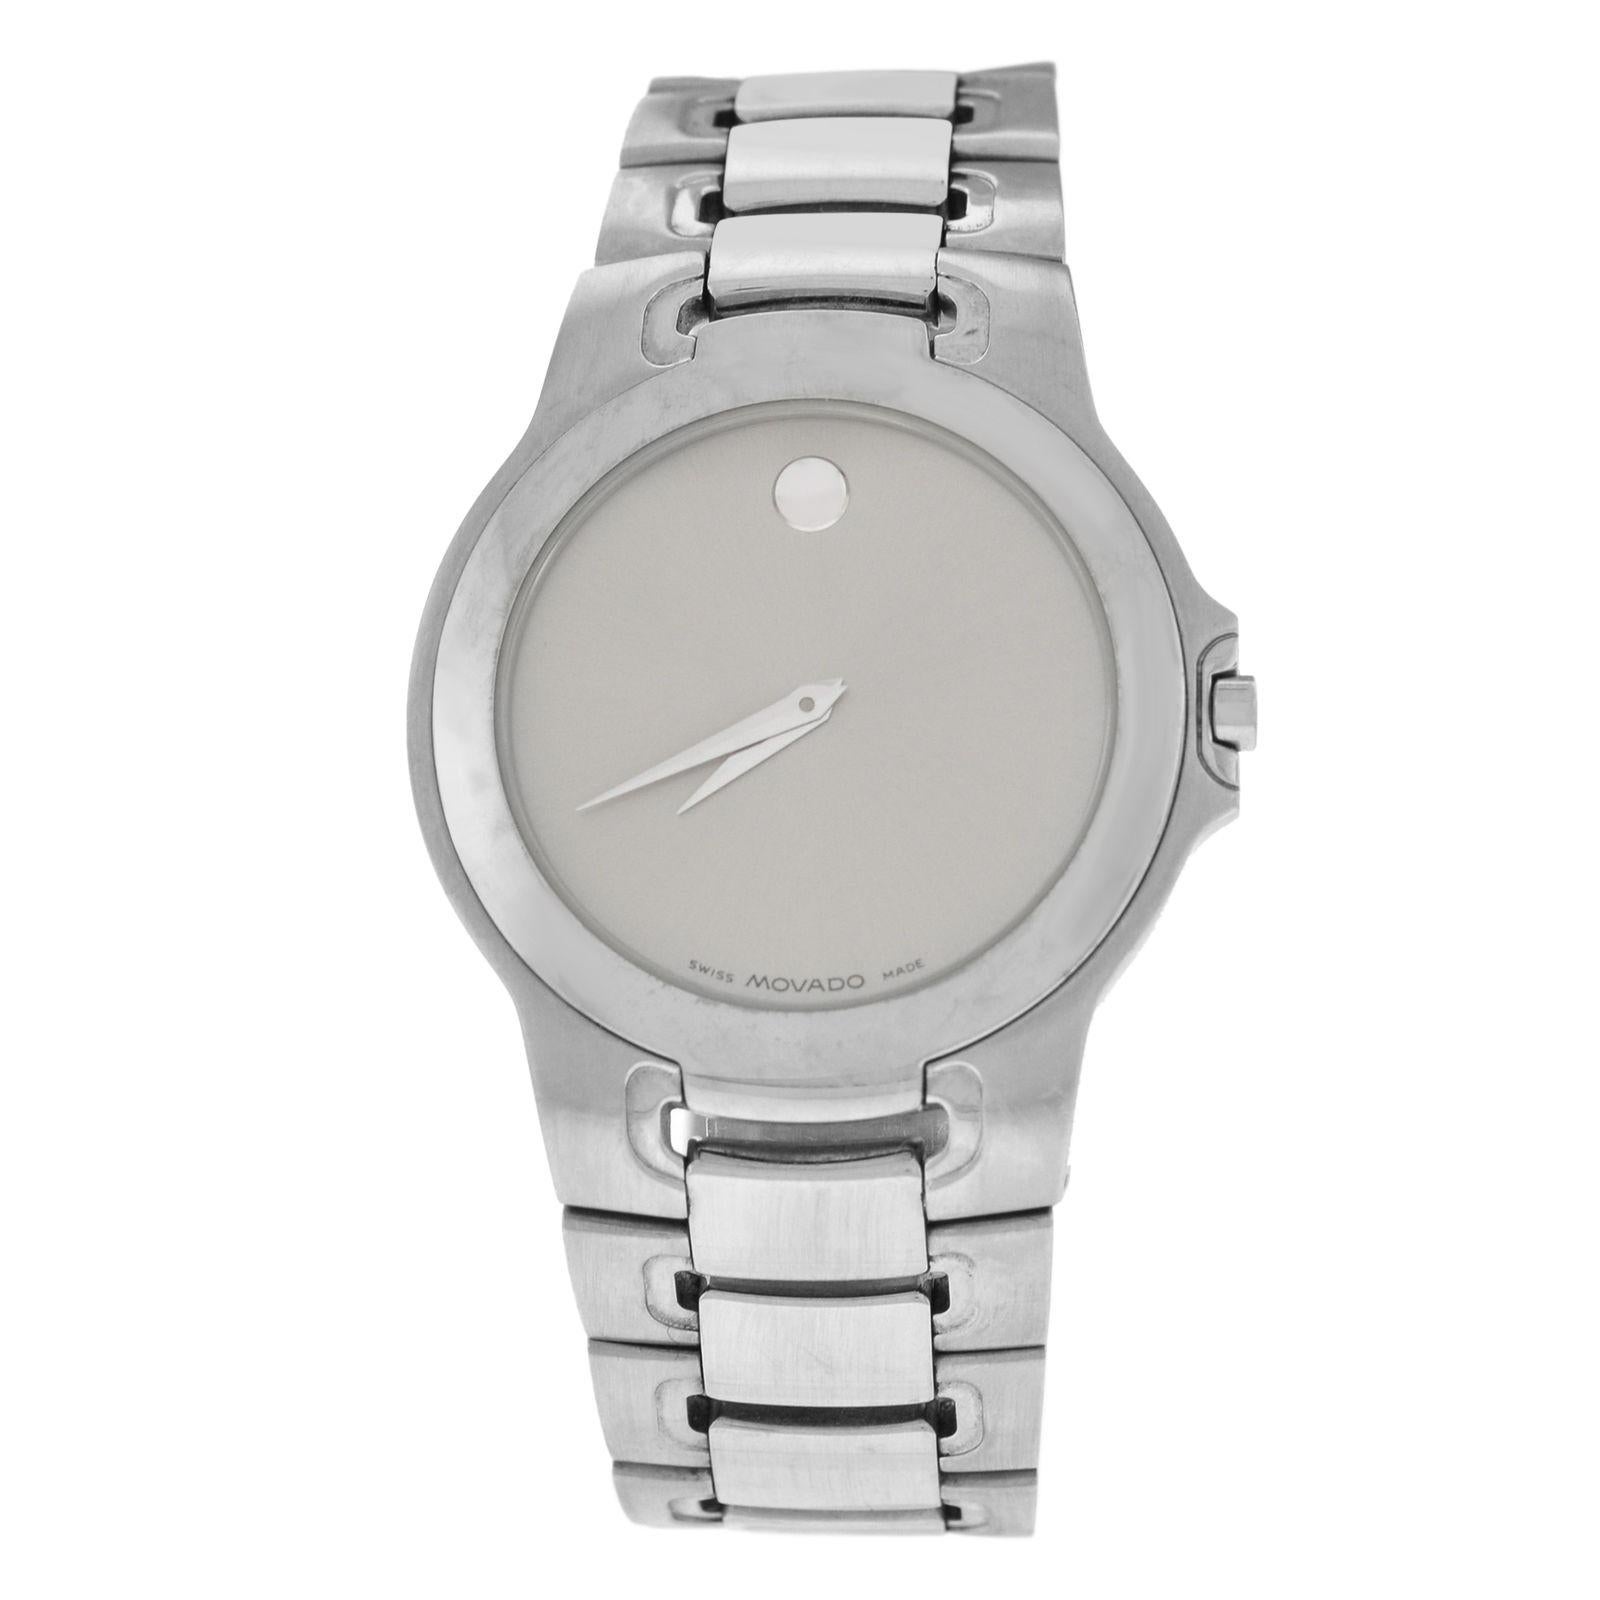 Authentic Unisex Movado Museum Steel Silver Dial Quart Watch For Sale